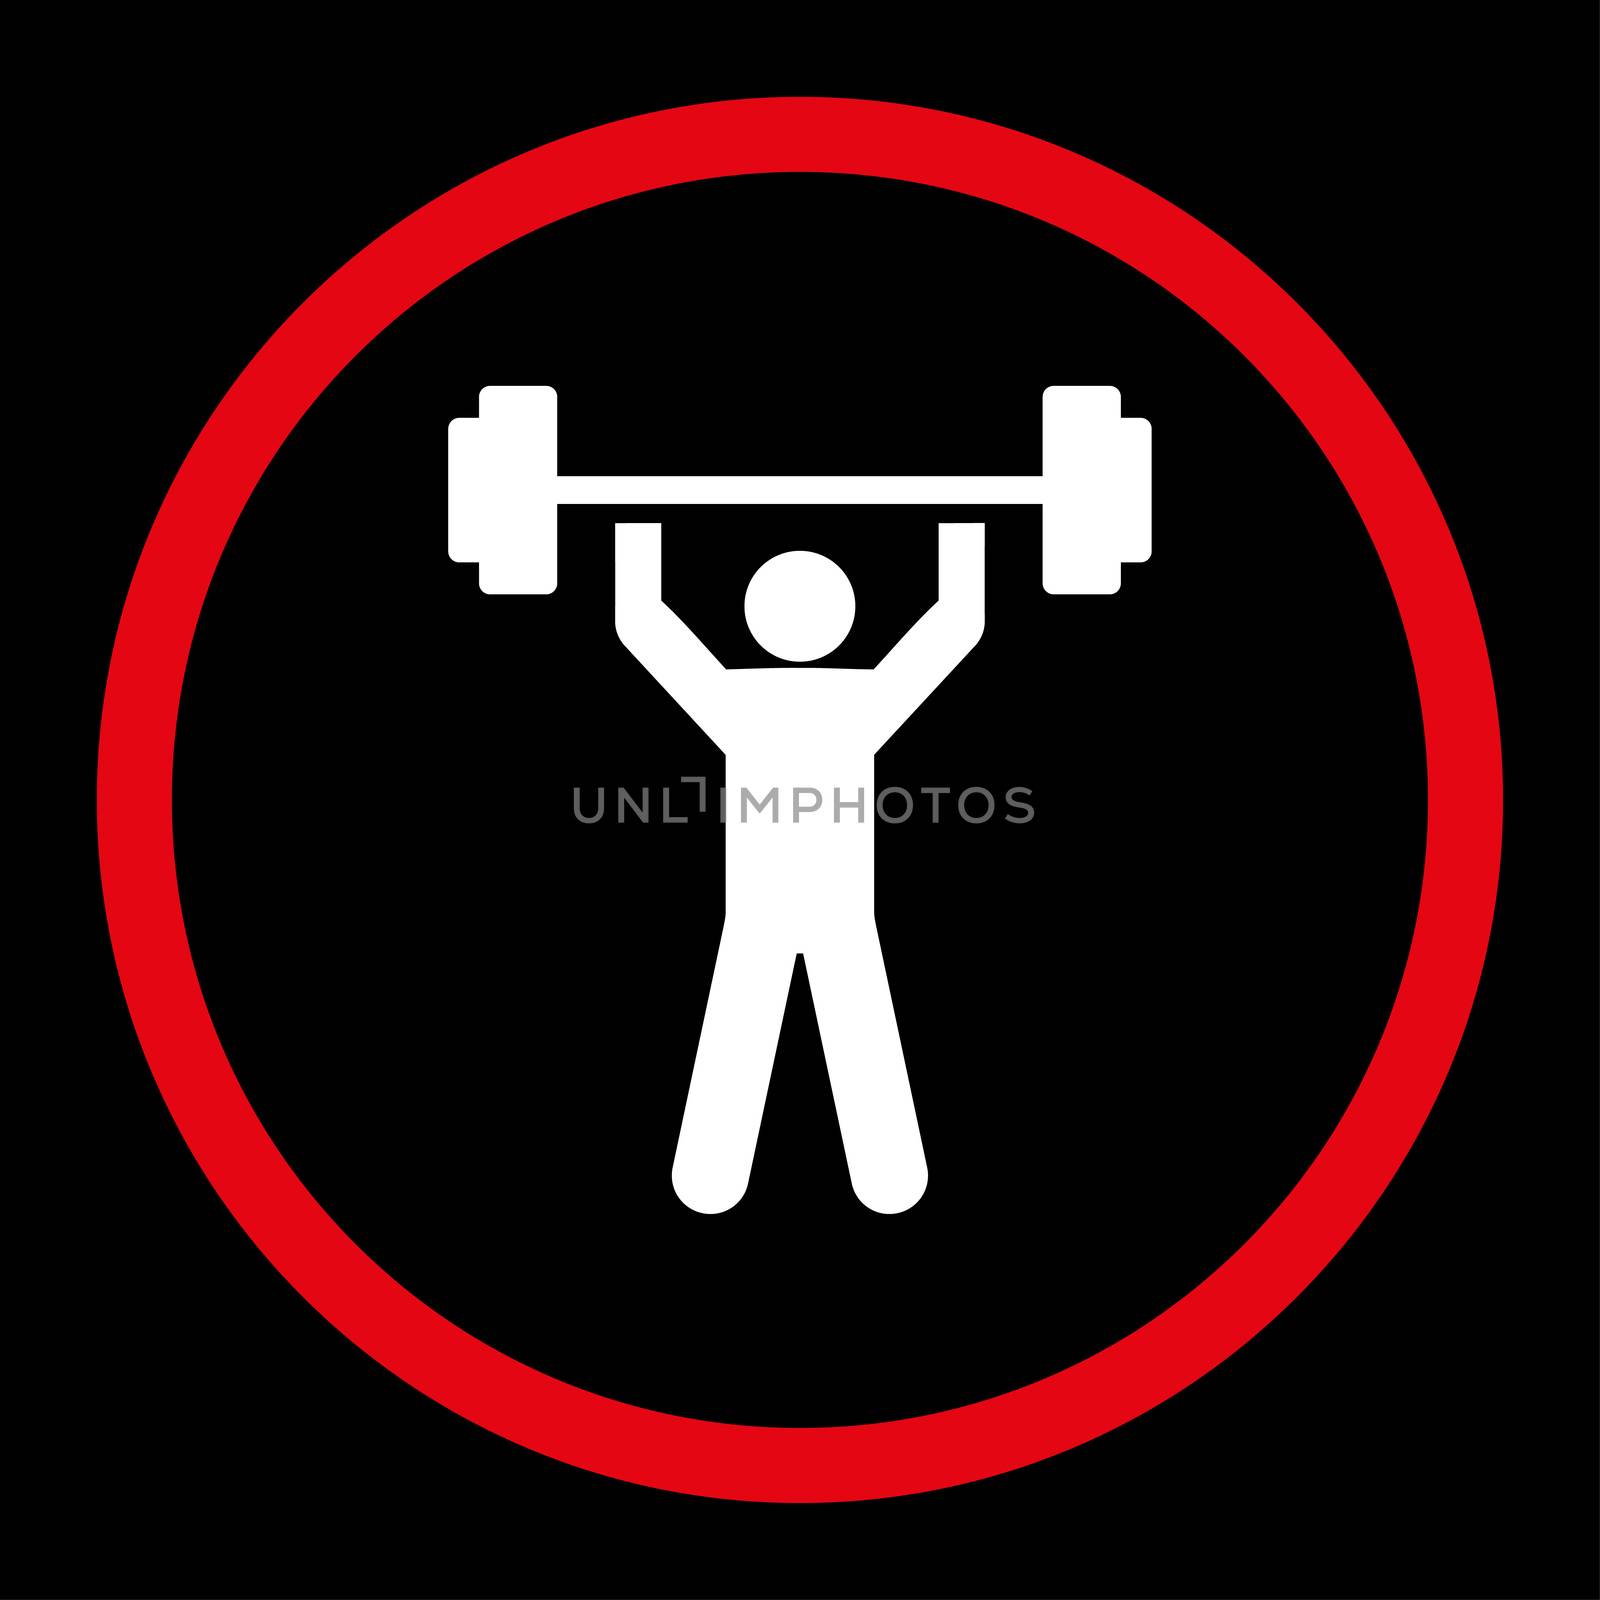 Power lifting icon. This rounded flat symbol is drawn with red and white colors on a black background.